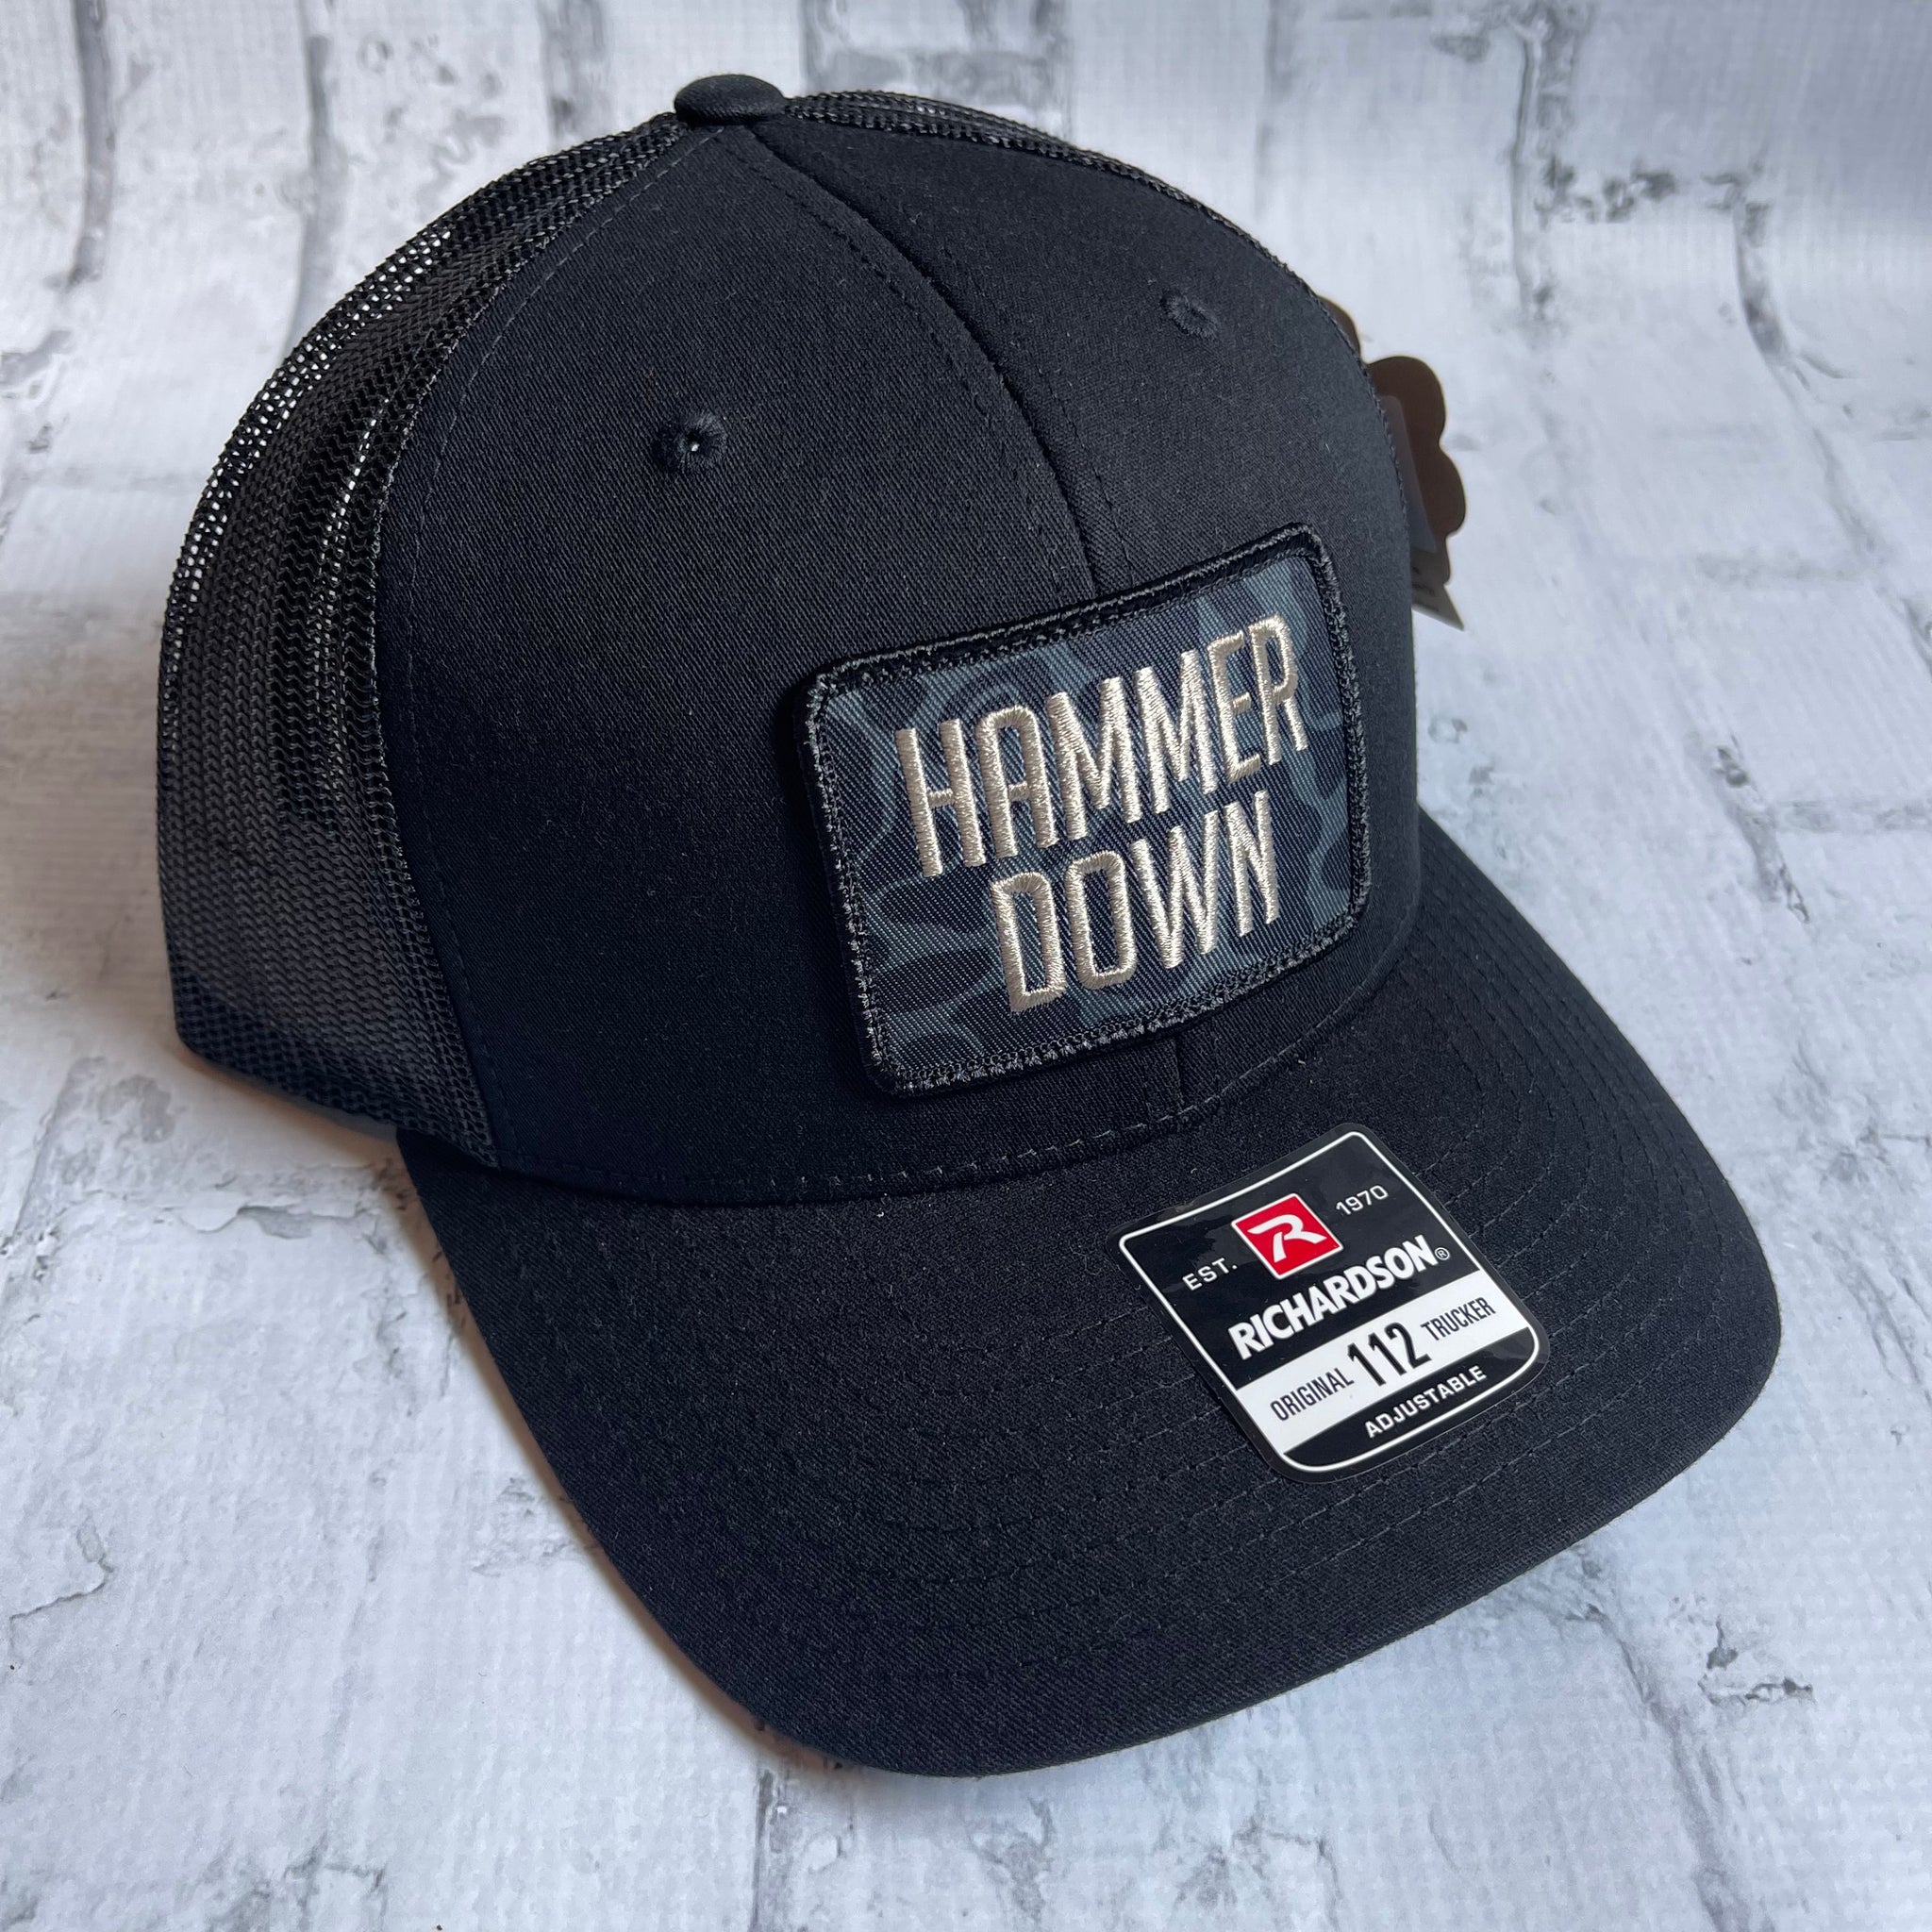 Hammer Down "Simple Black Duck Camo" Hat - Black with Woven Patch - Southern Charm "Shop The Charm"